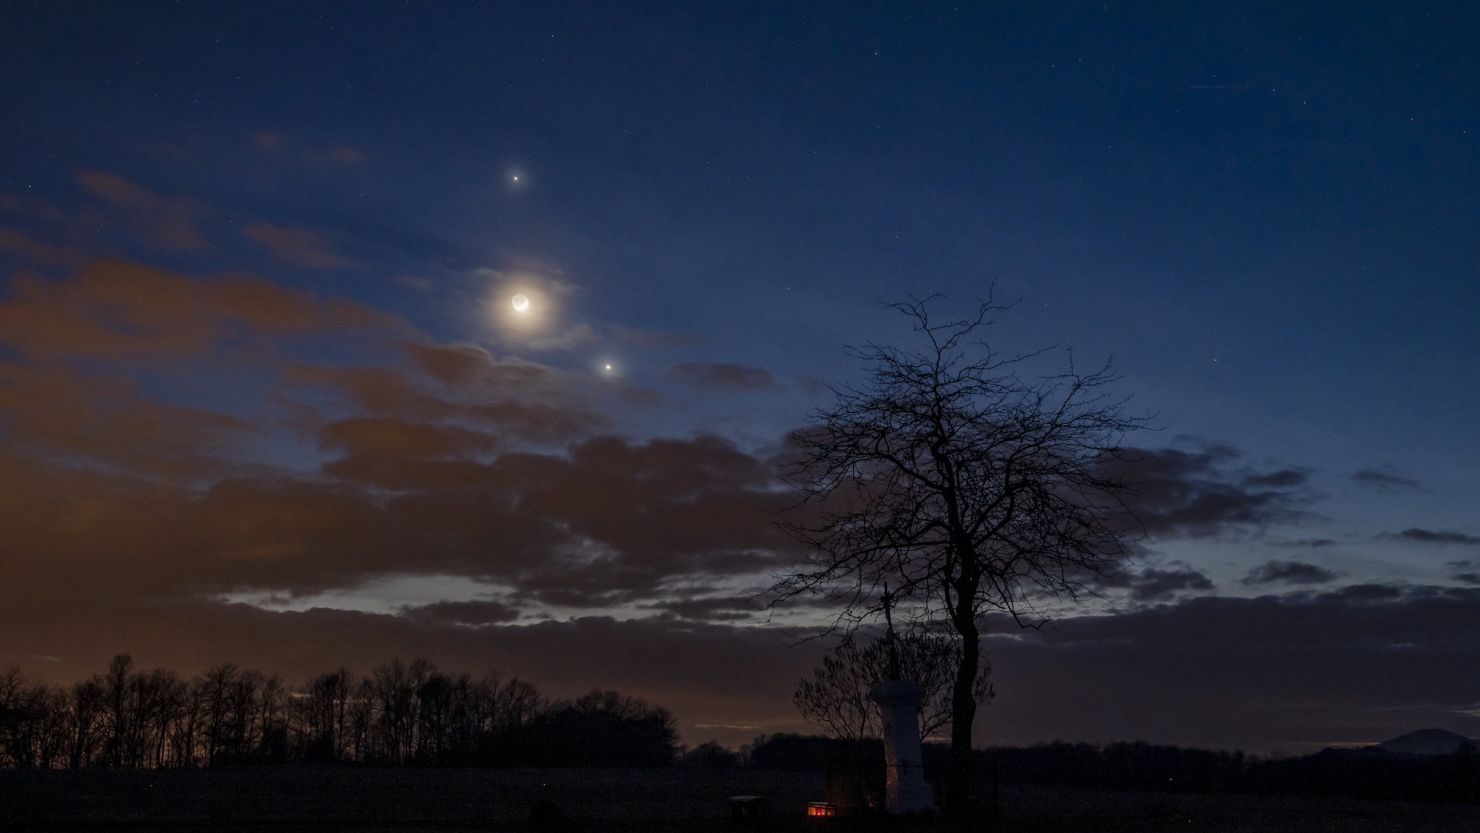 Jupiter, the moon and planet Venus, further right, observed on the sky photographed near Salgotarjan, Hungary, on February 22.